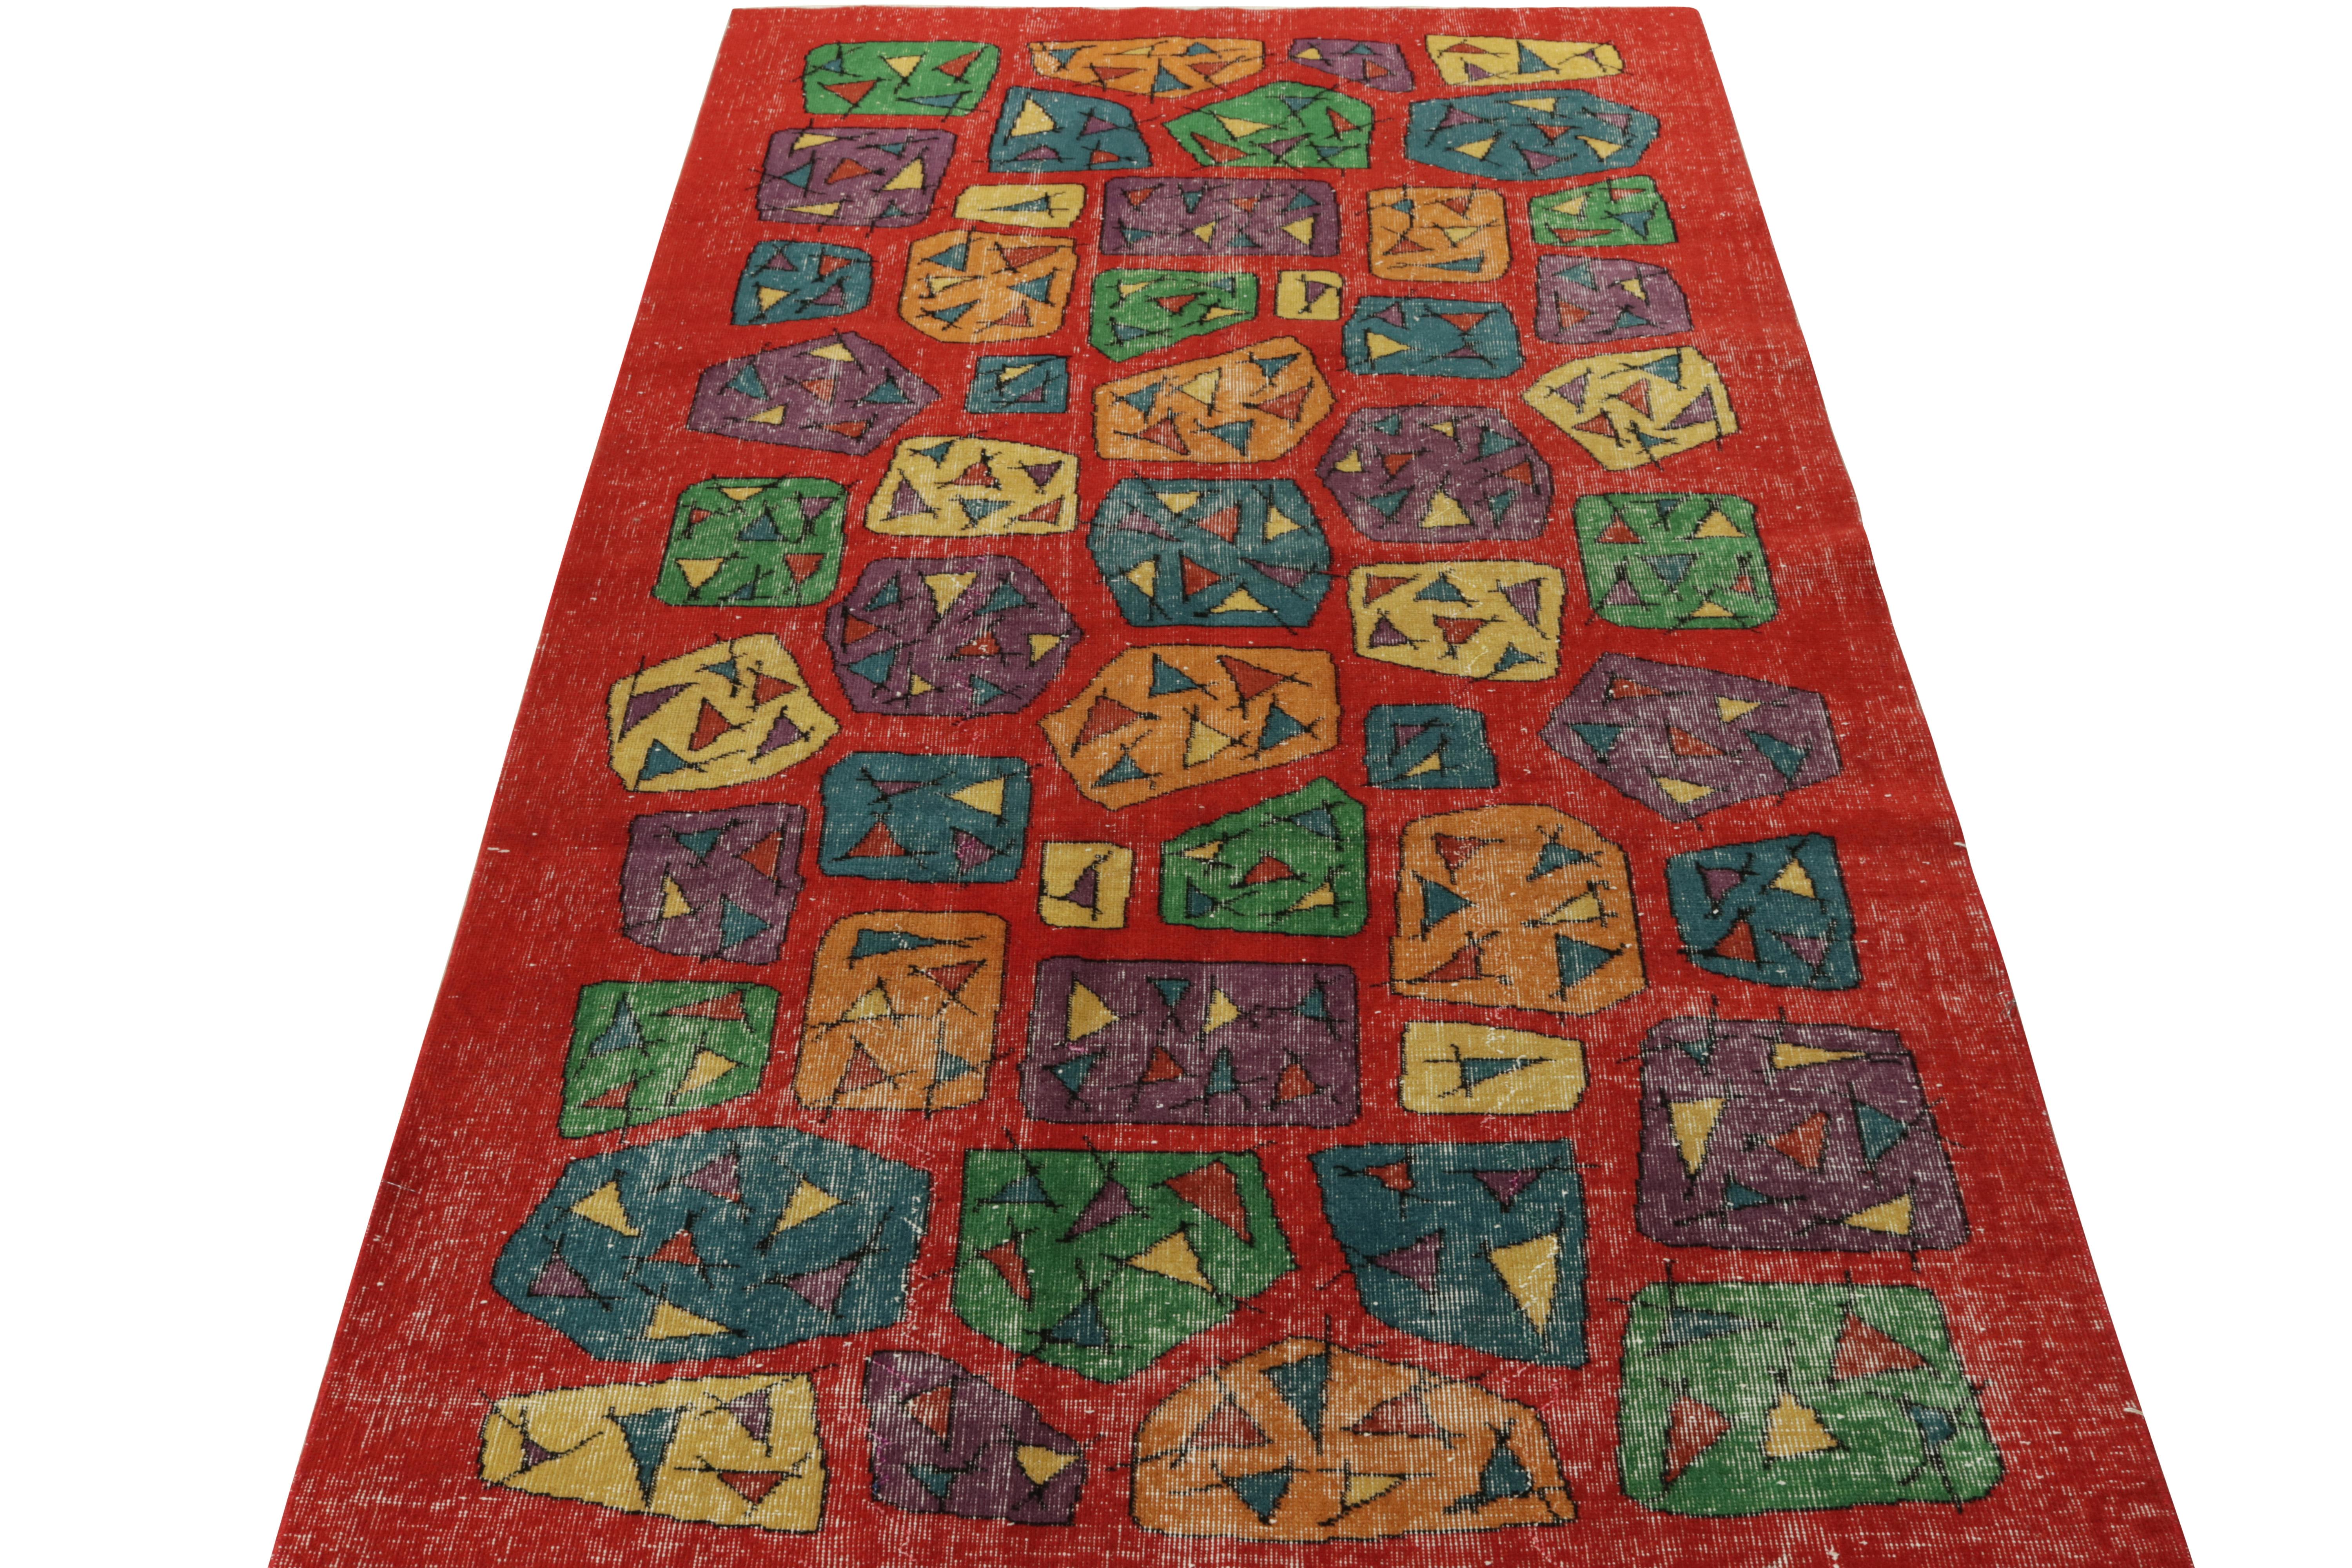 Hand-knotted in wool circa 1960-1970, a distressed style Mid-Century Modern rug from the celebrated artist Zeki Muren with abstract and Art Deco inspirations is one of his latest pieces to join Rug & Kilim’s Mid-Century Pasha collection. This 4x9